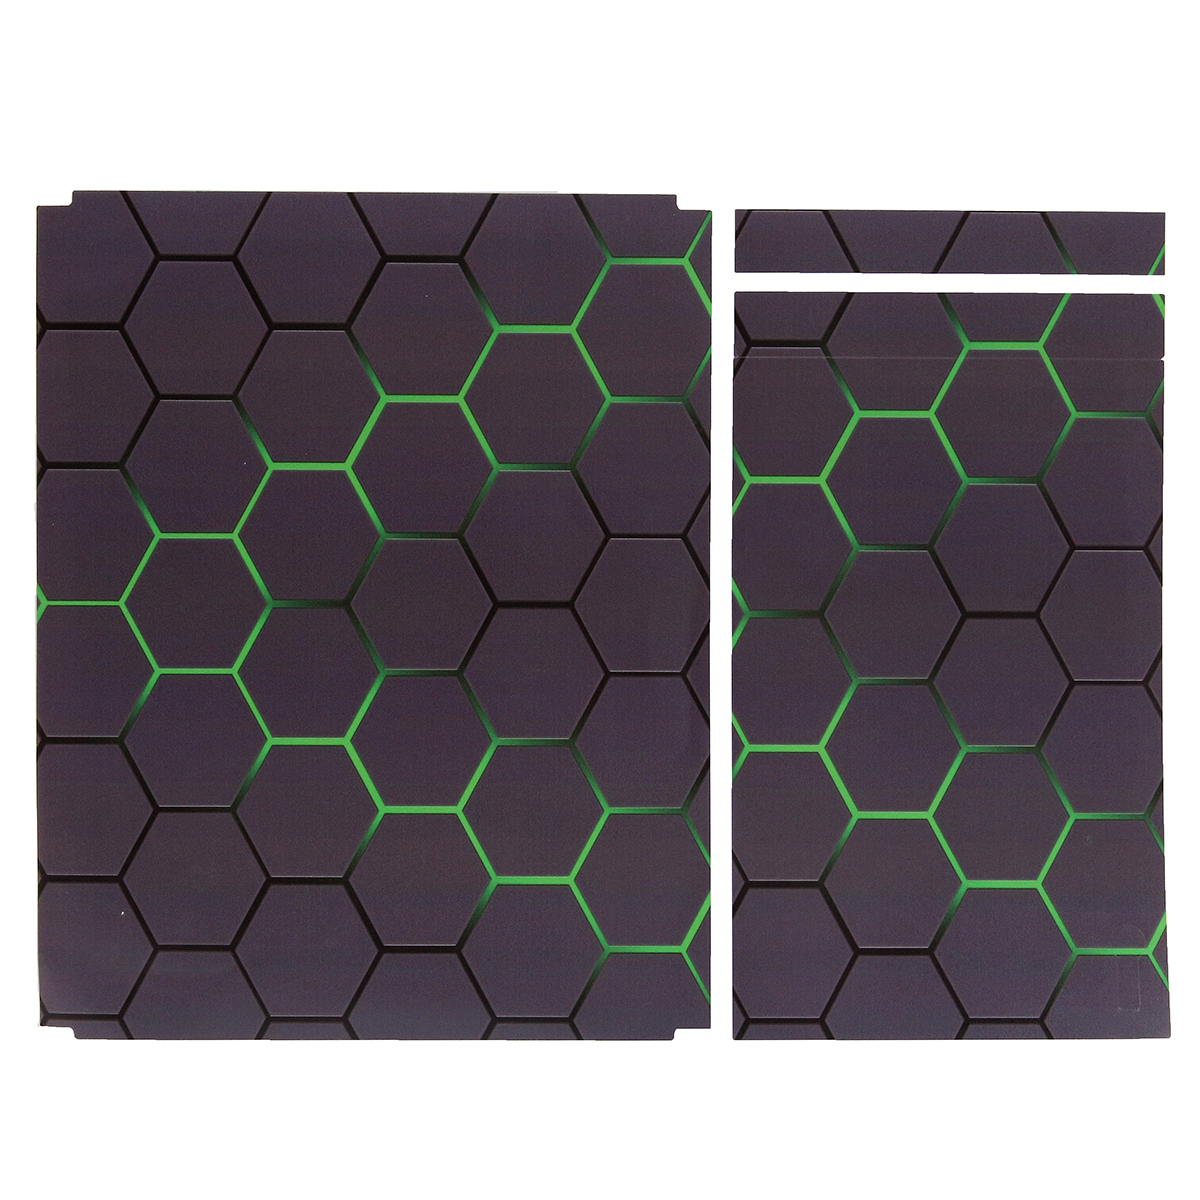 Green Grid Vinyl Decal Skin Stickers Cover for Xbox One S Game Console&2 Controllers 20